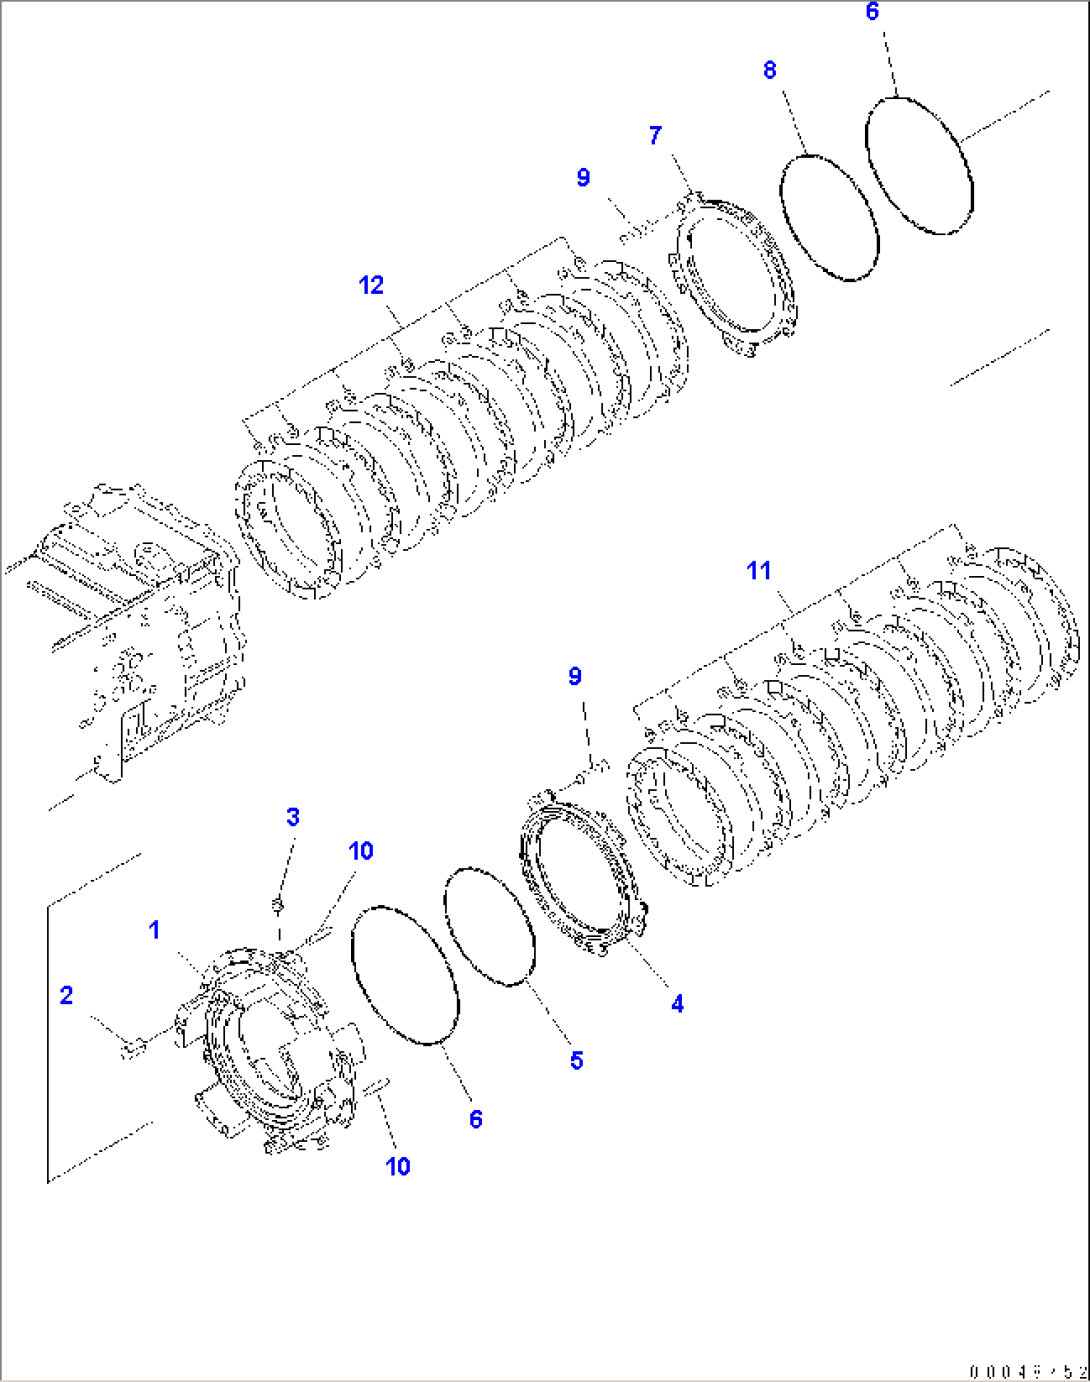 TRANSMISSION (REVERSE AND FORWARD HOUSING)